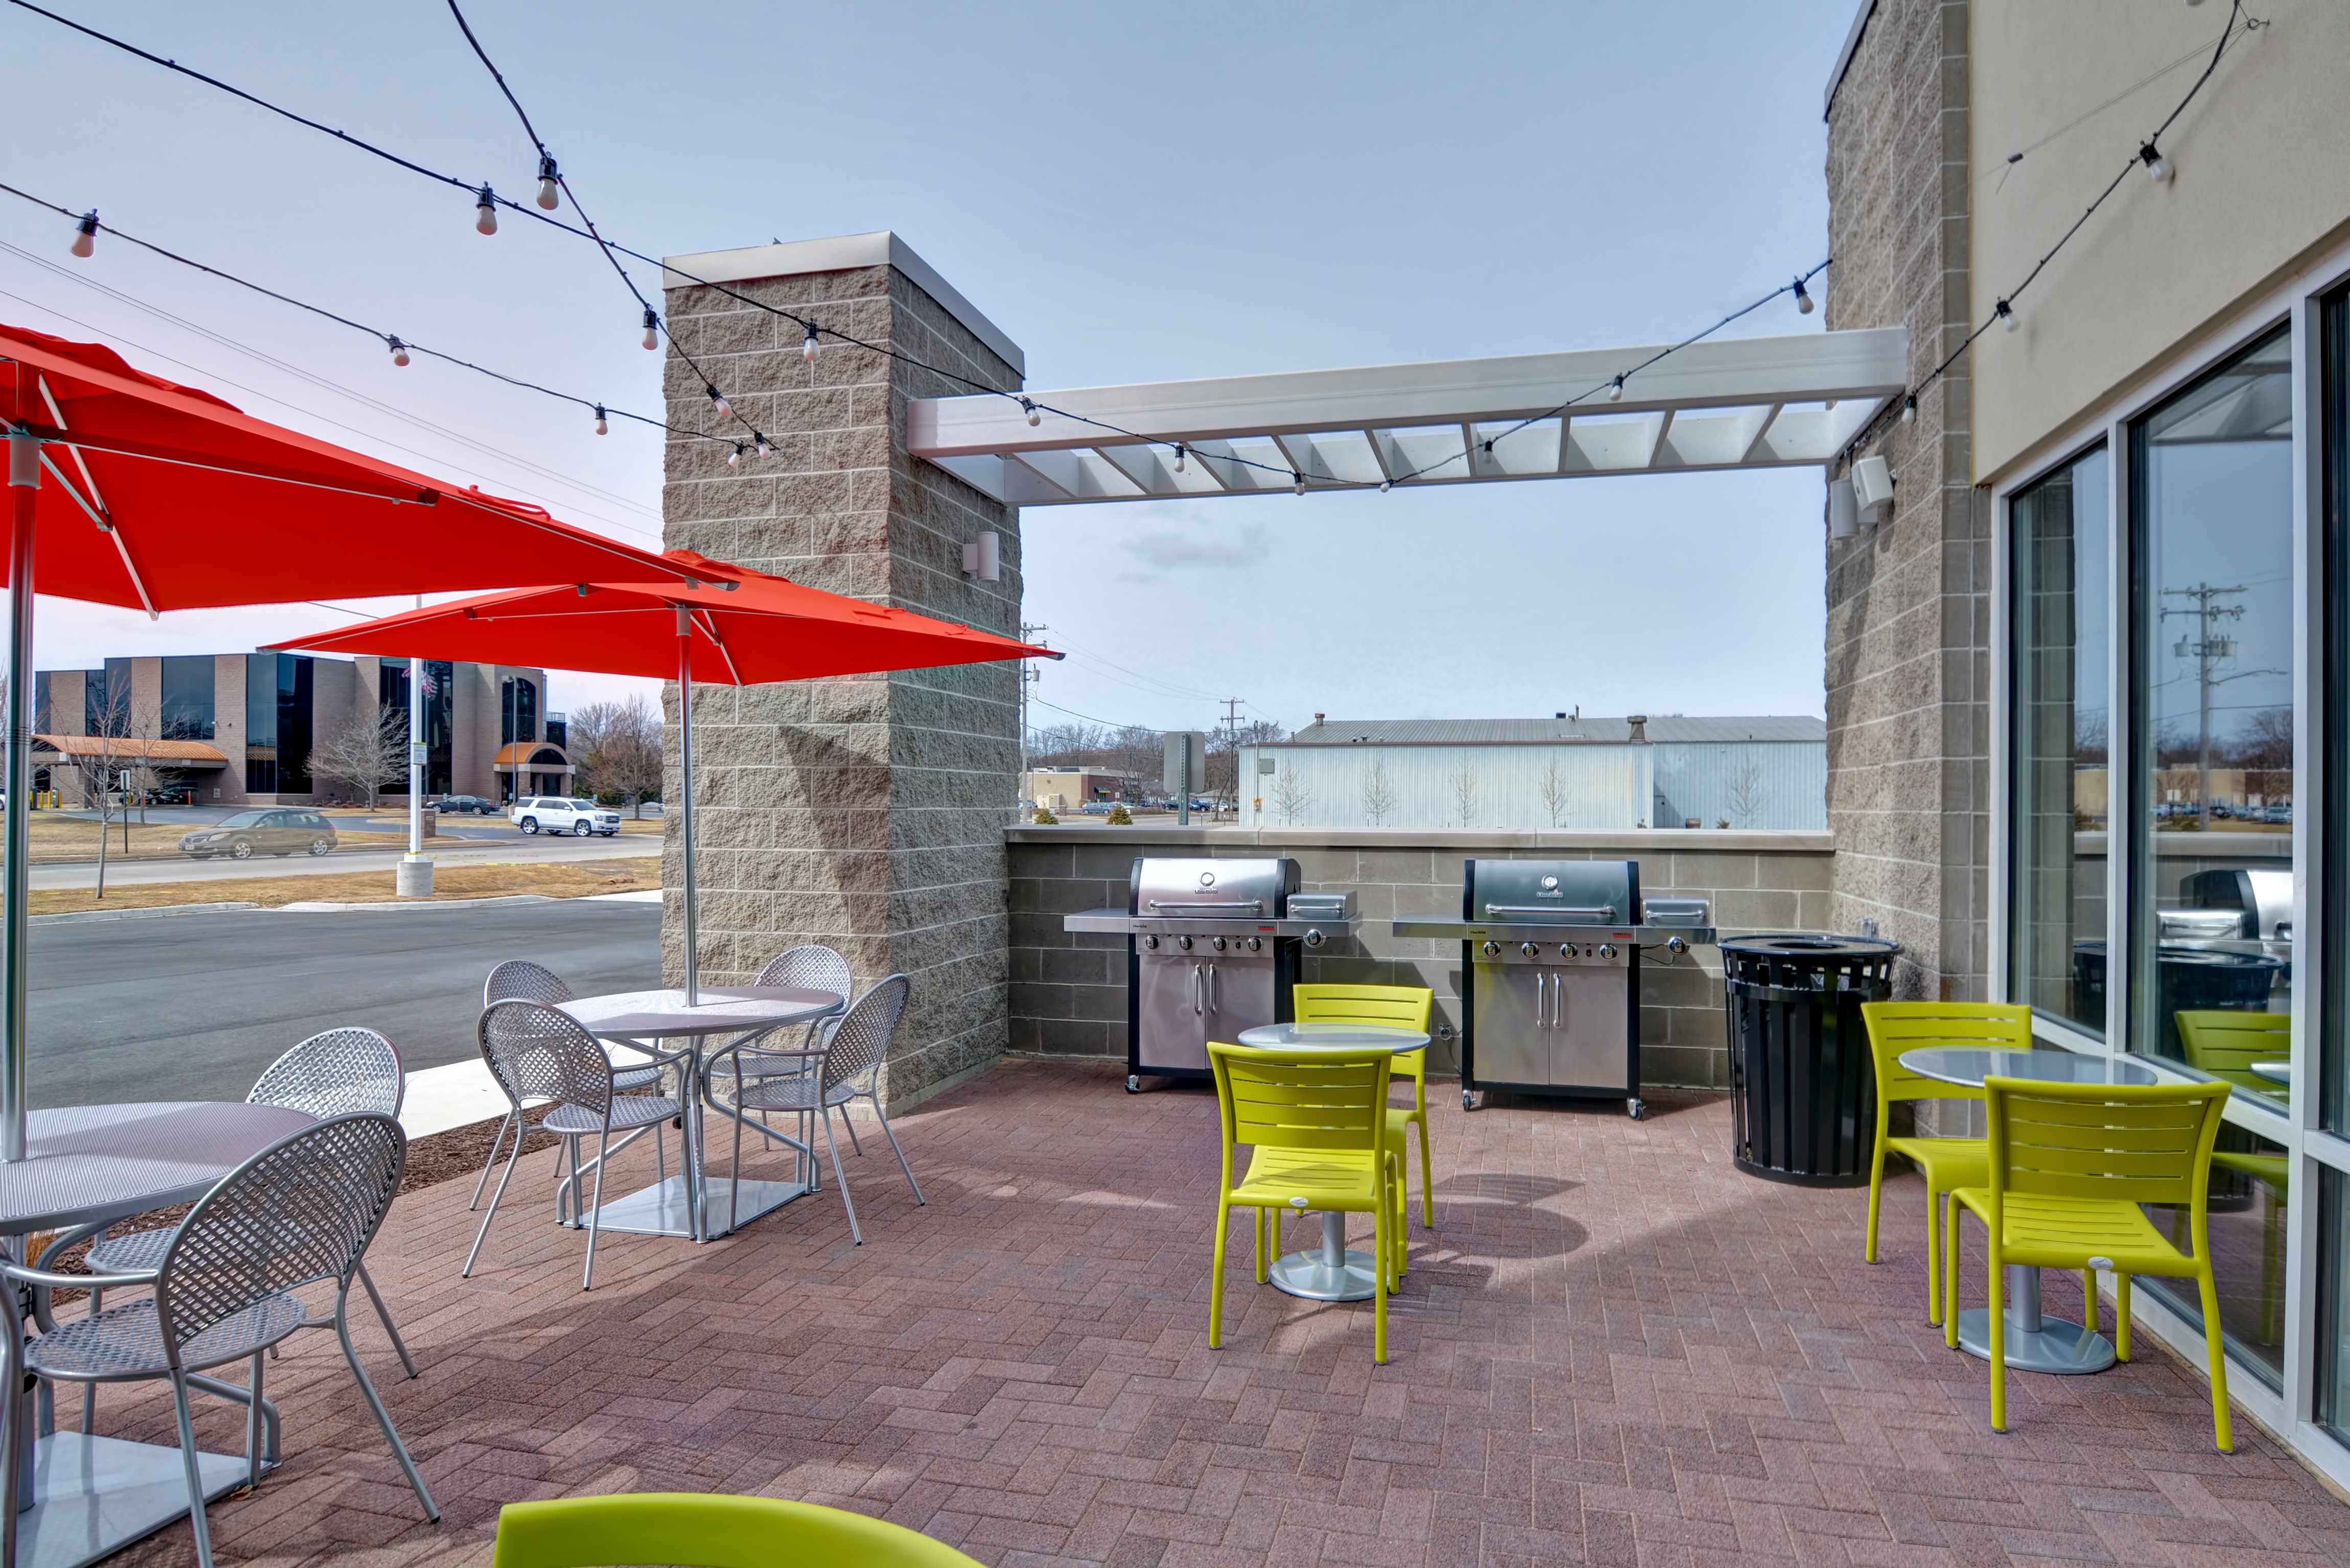 Outdoor Patio with Tables, Chairs and Grills